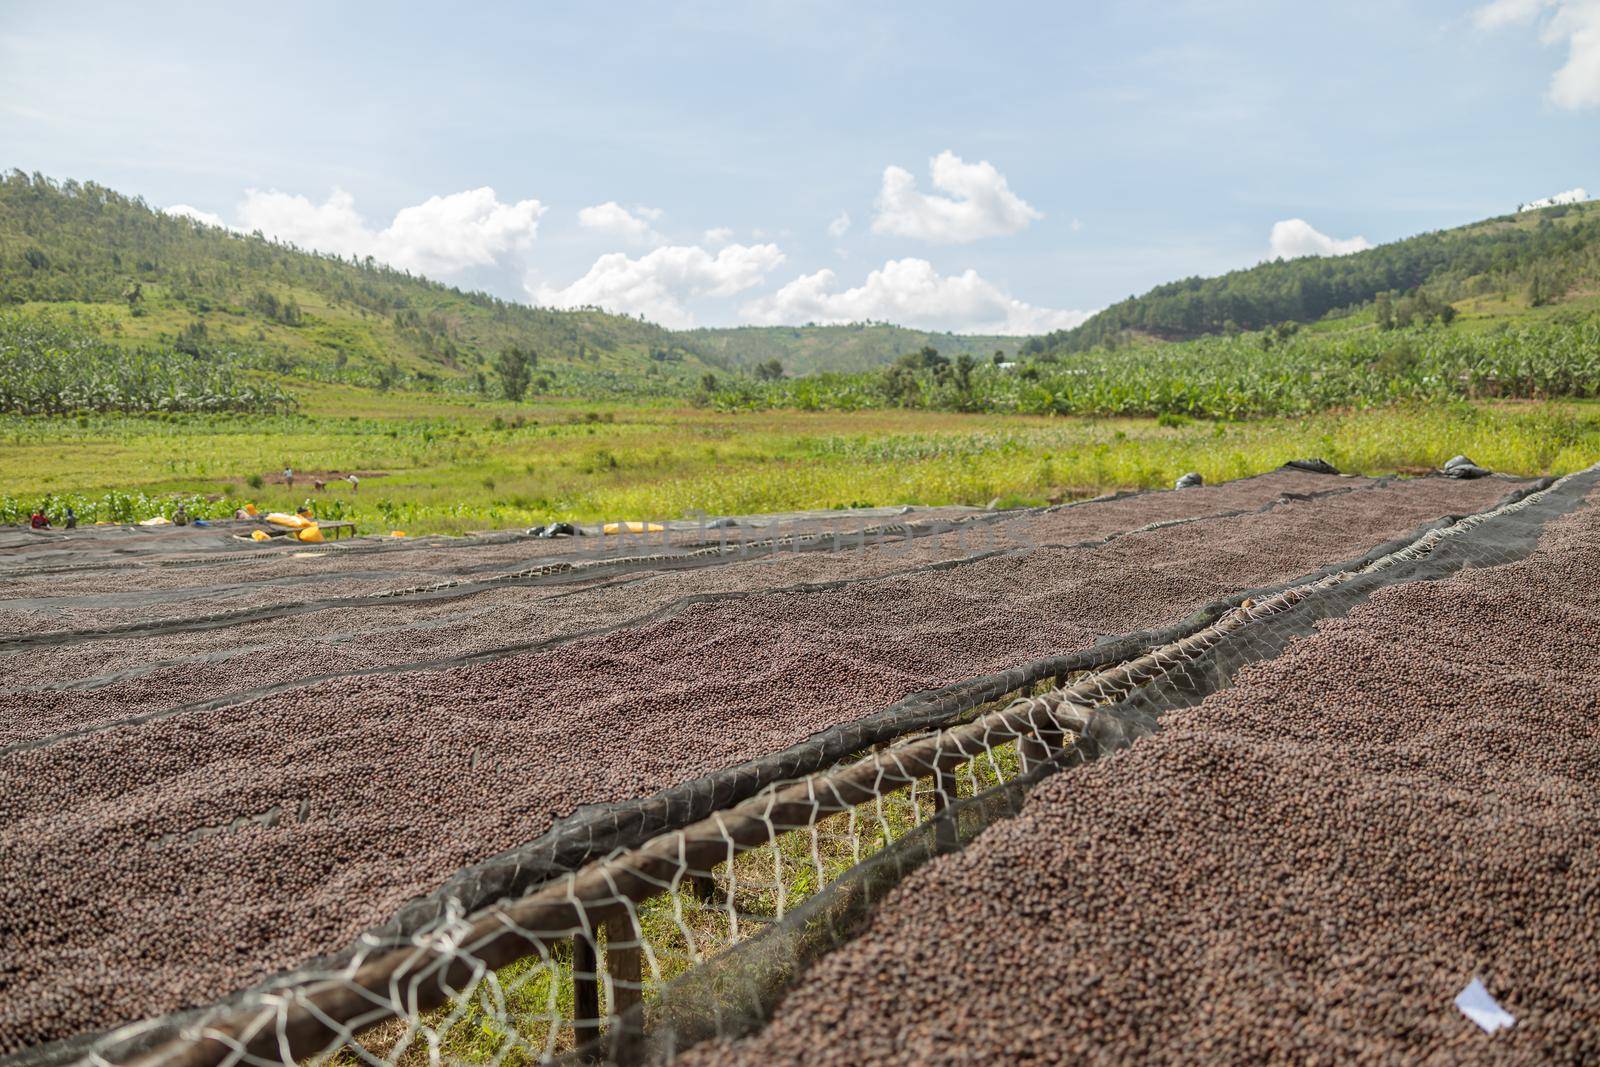 Coffee beans drying in the sun at coffee farm outdoors by Yaroslav_astakhov